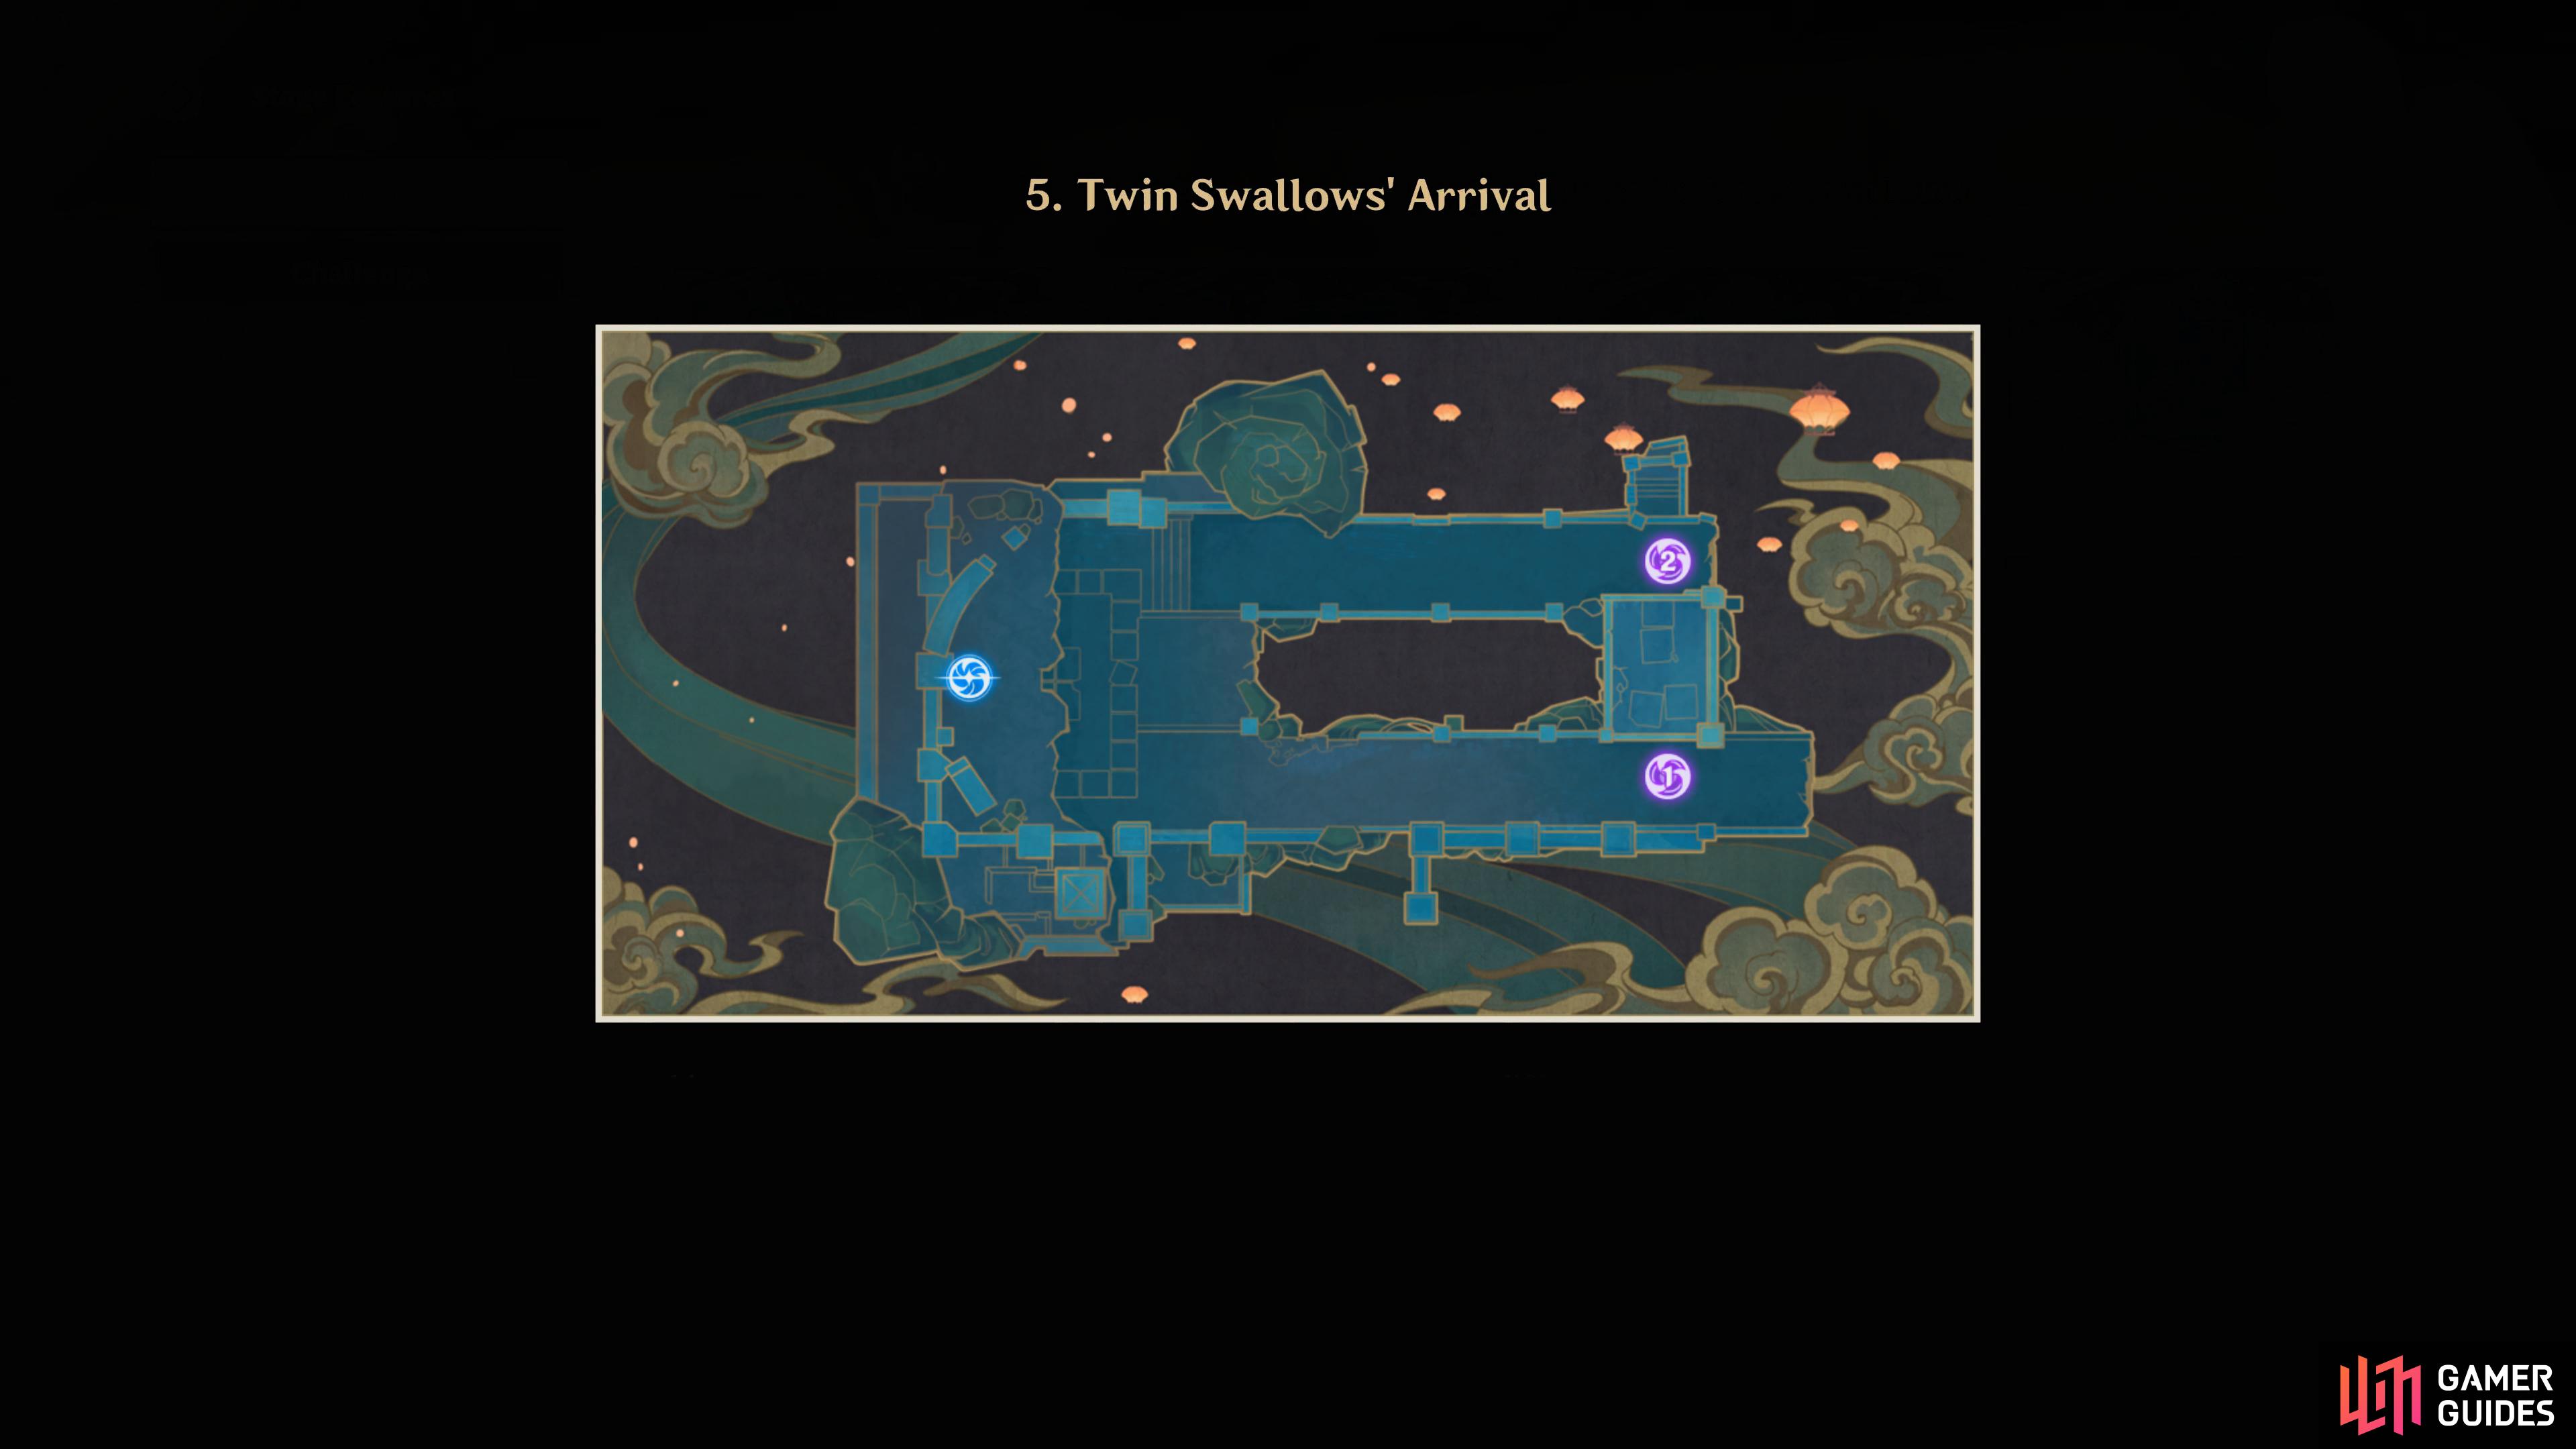 An image of the Twin Swallows' Arrival map.